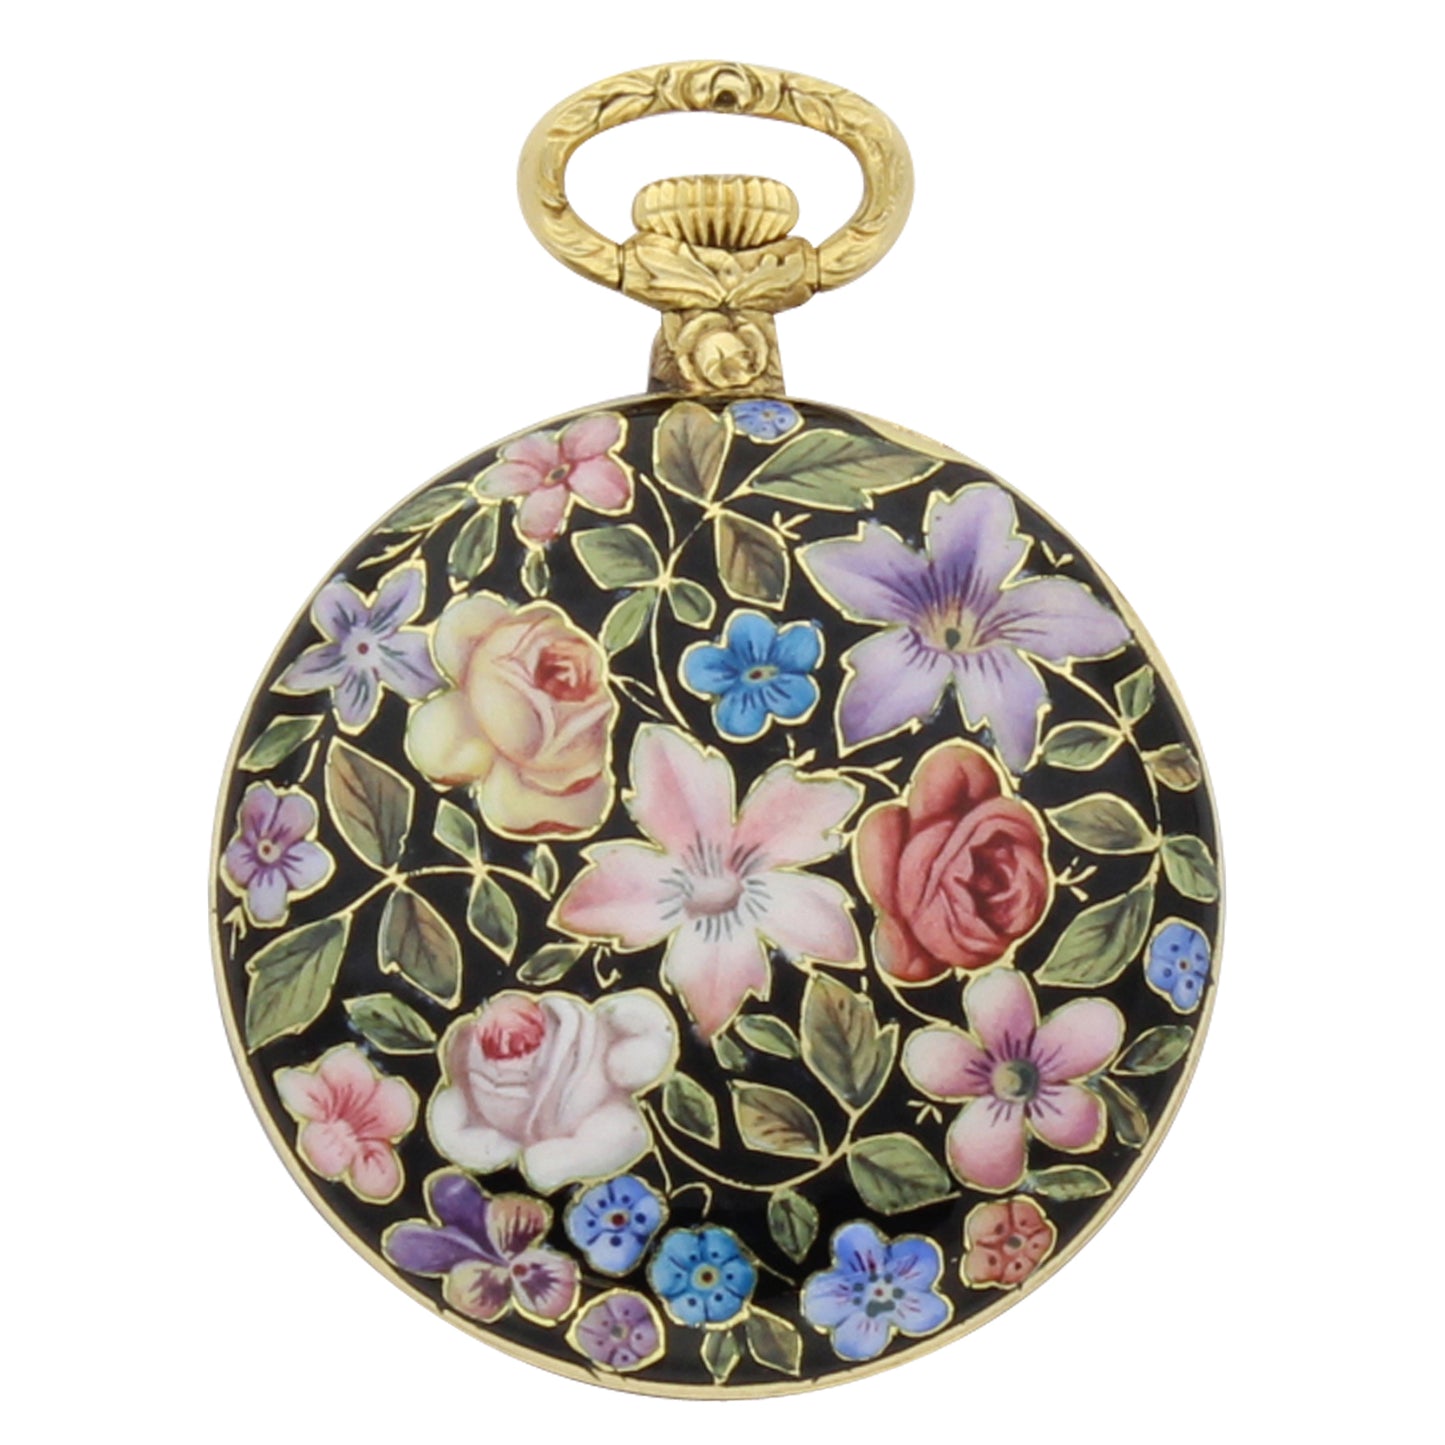 18ct yellow gold and enamel cased Cloisonné fob watch - made for the Chinese market. Circa 1890